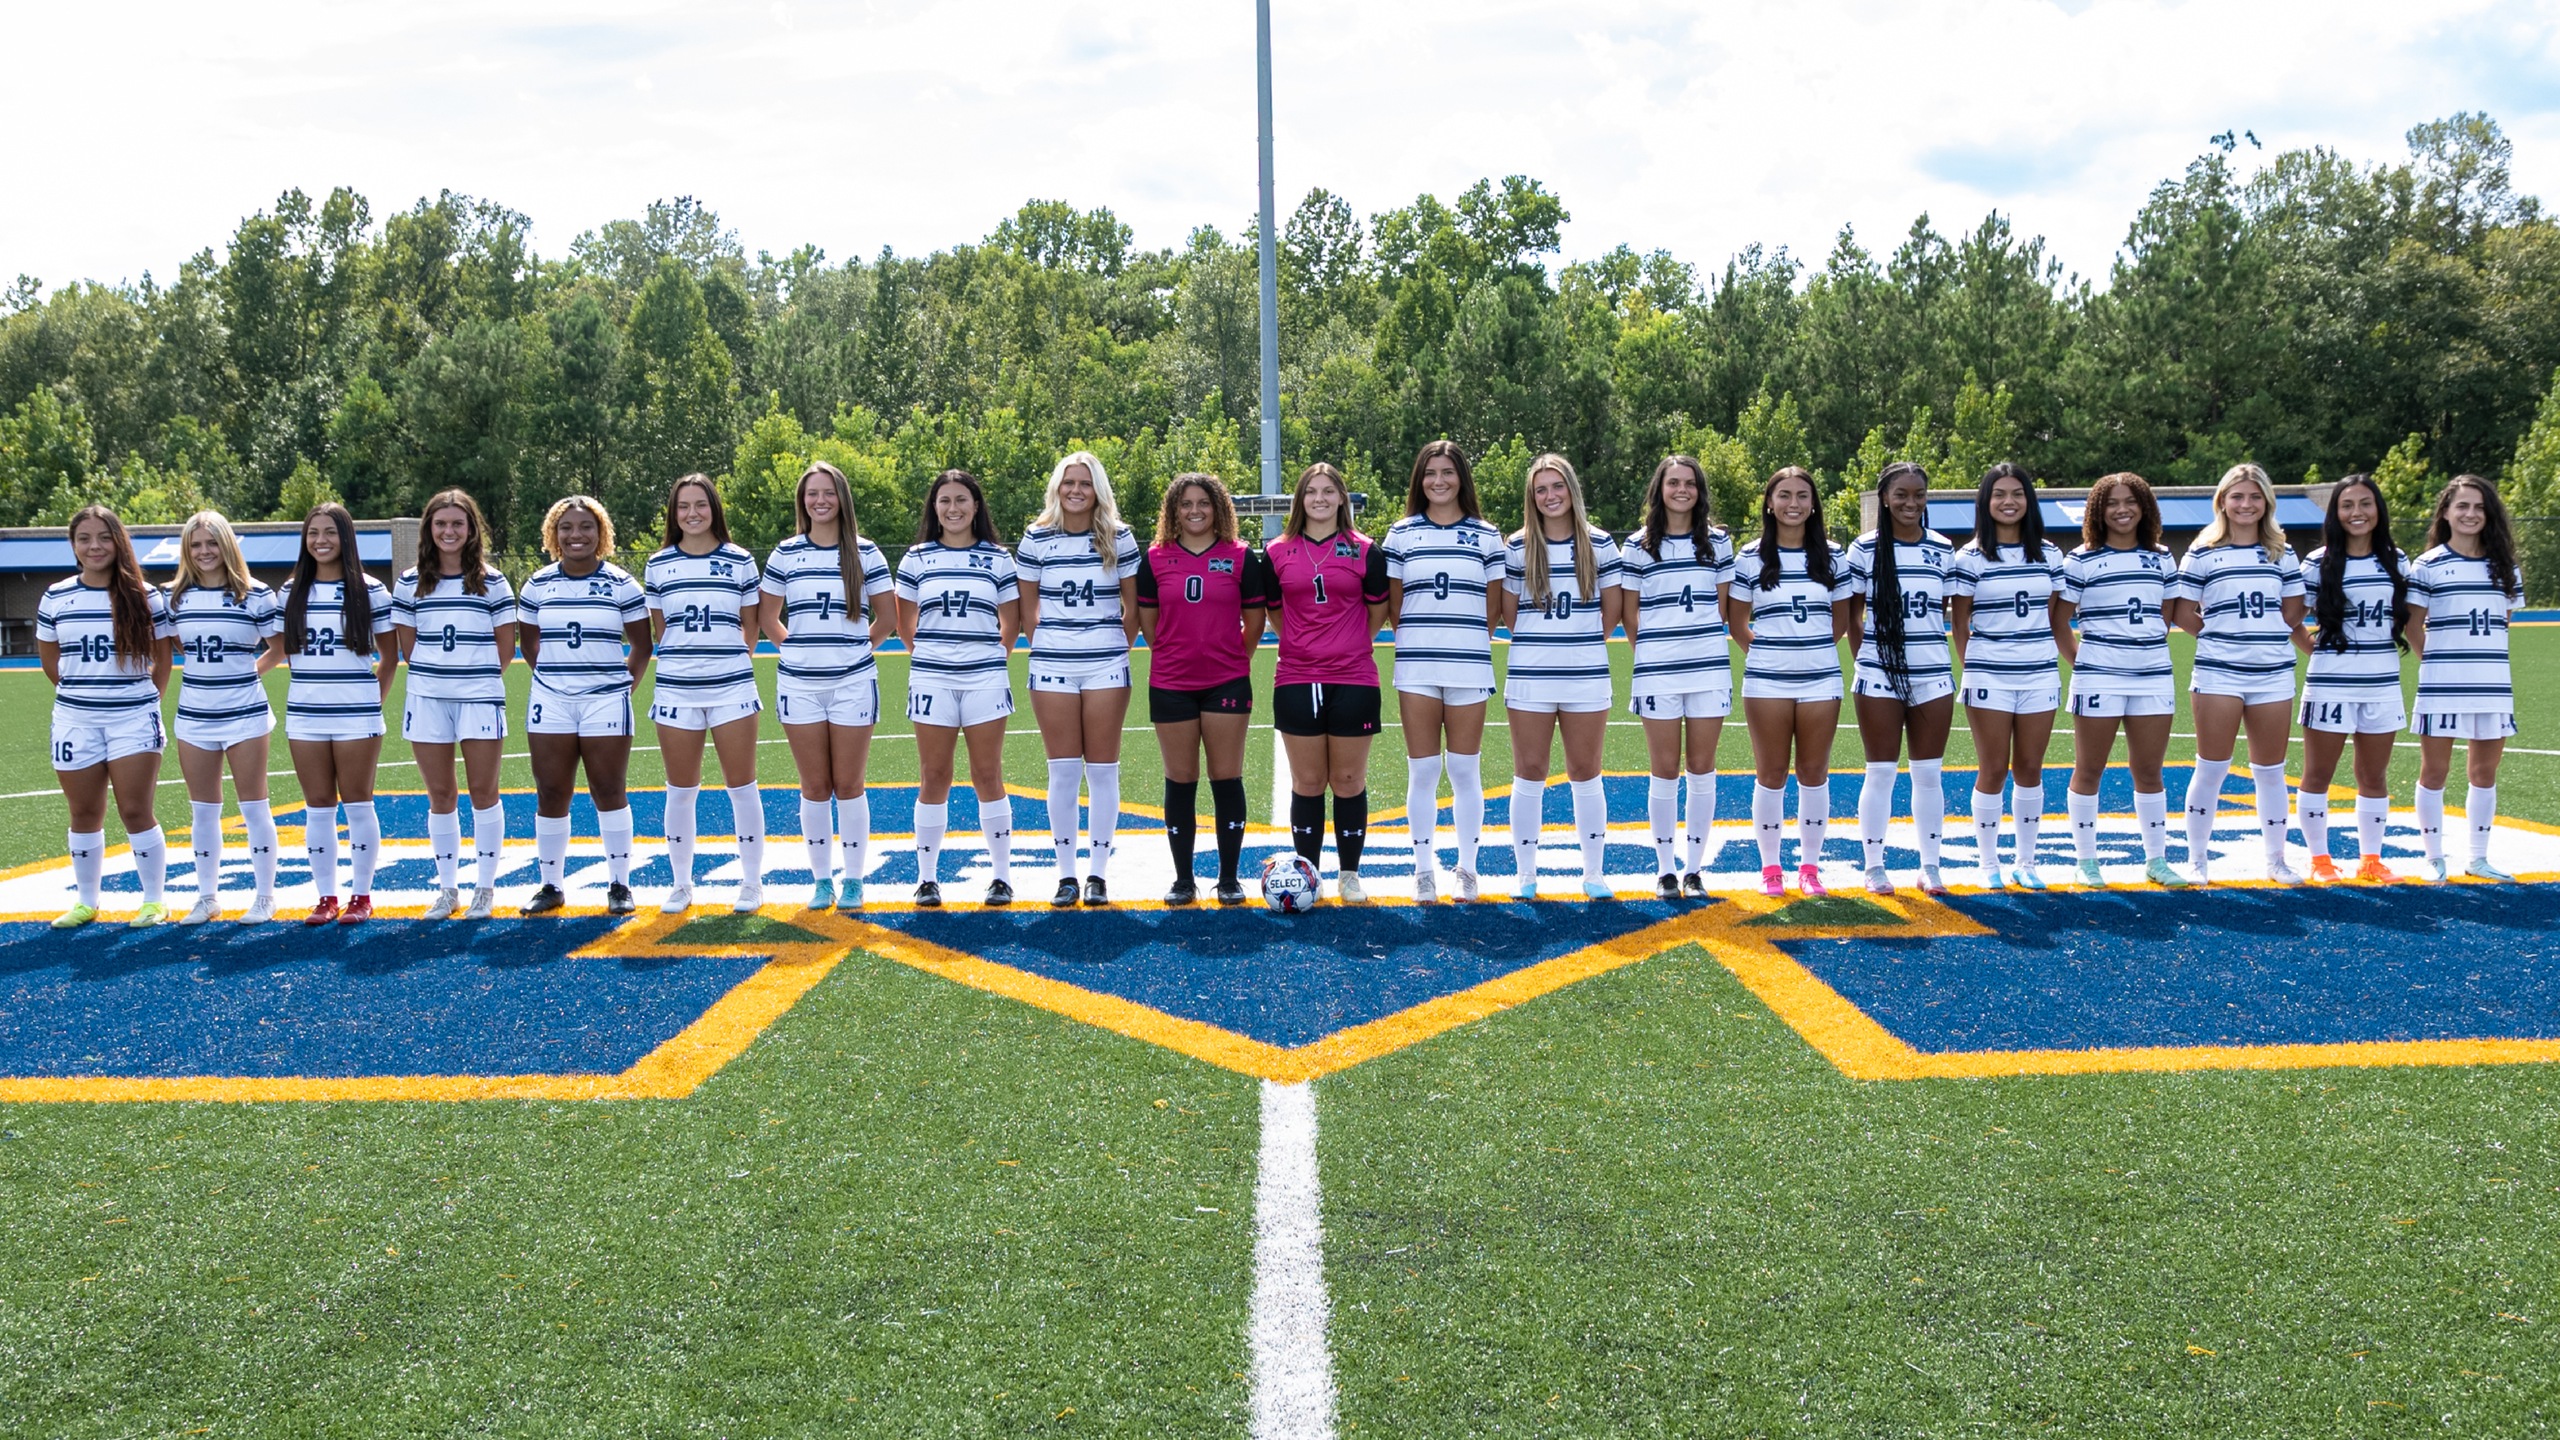 Women’s Soccer clinches playoff berth